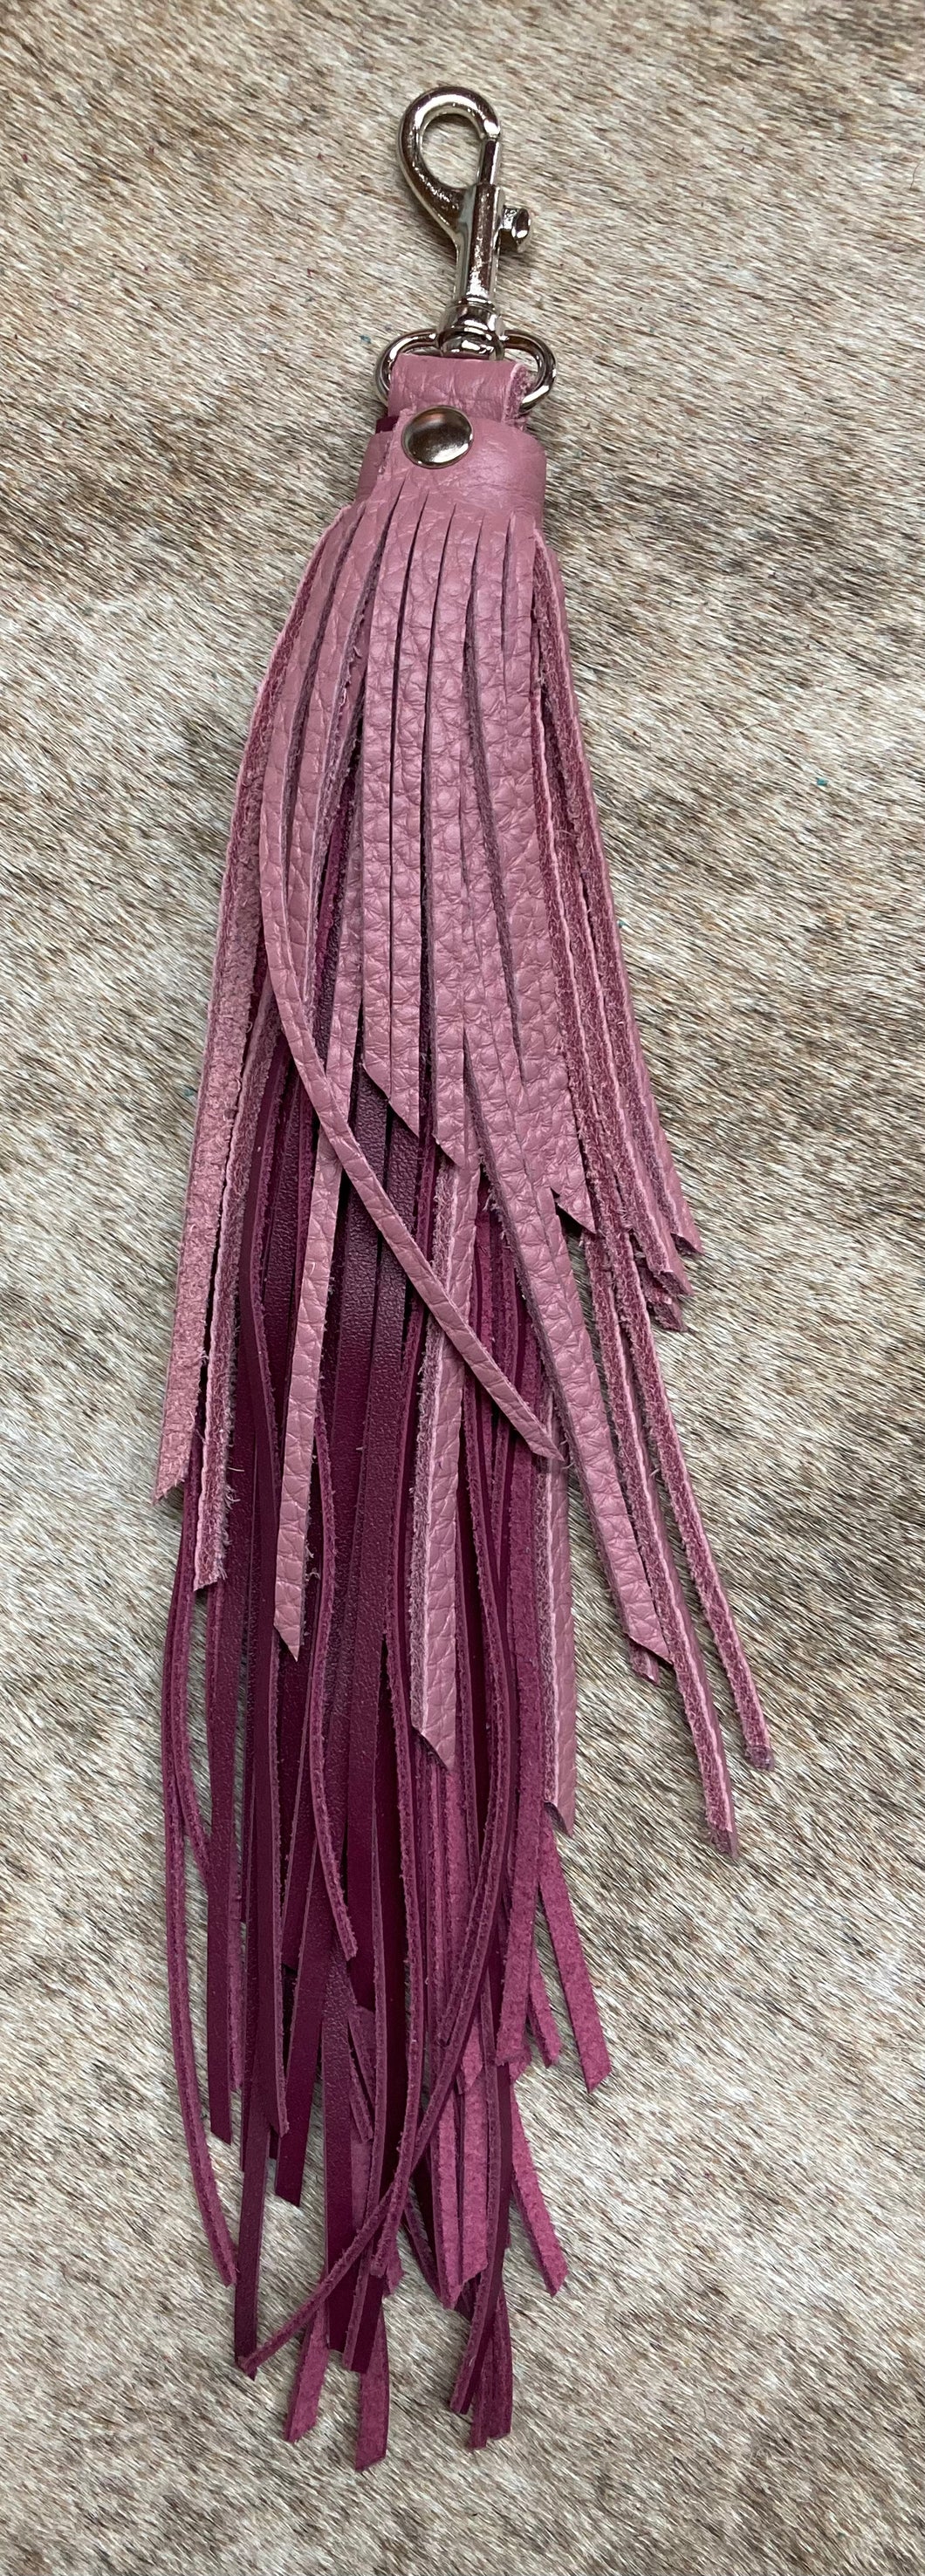 Purse Tassel - Pink and Burgundy Leather